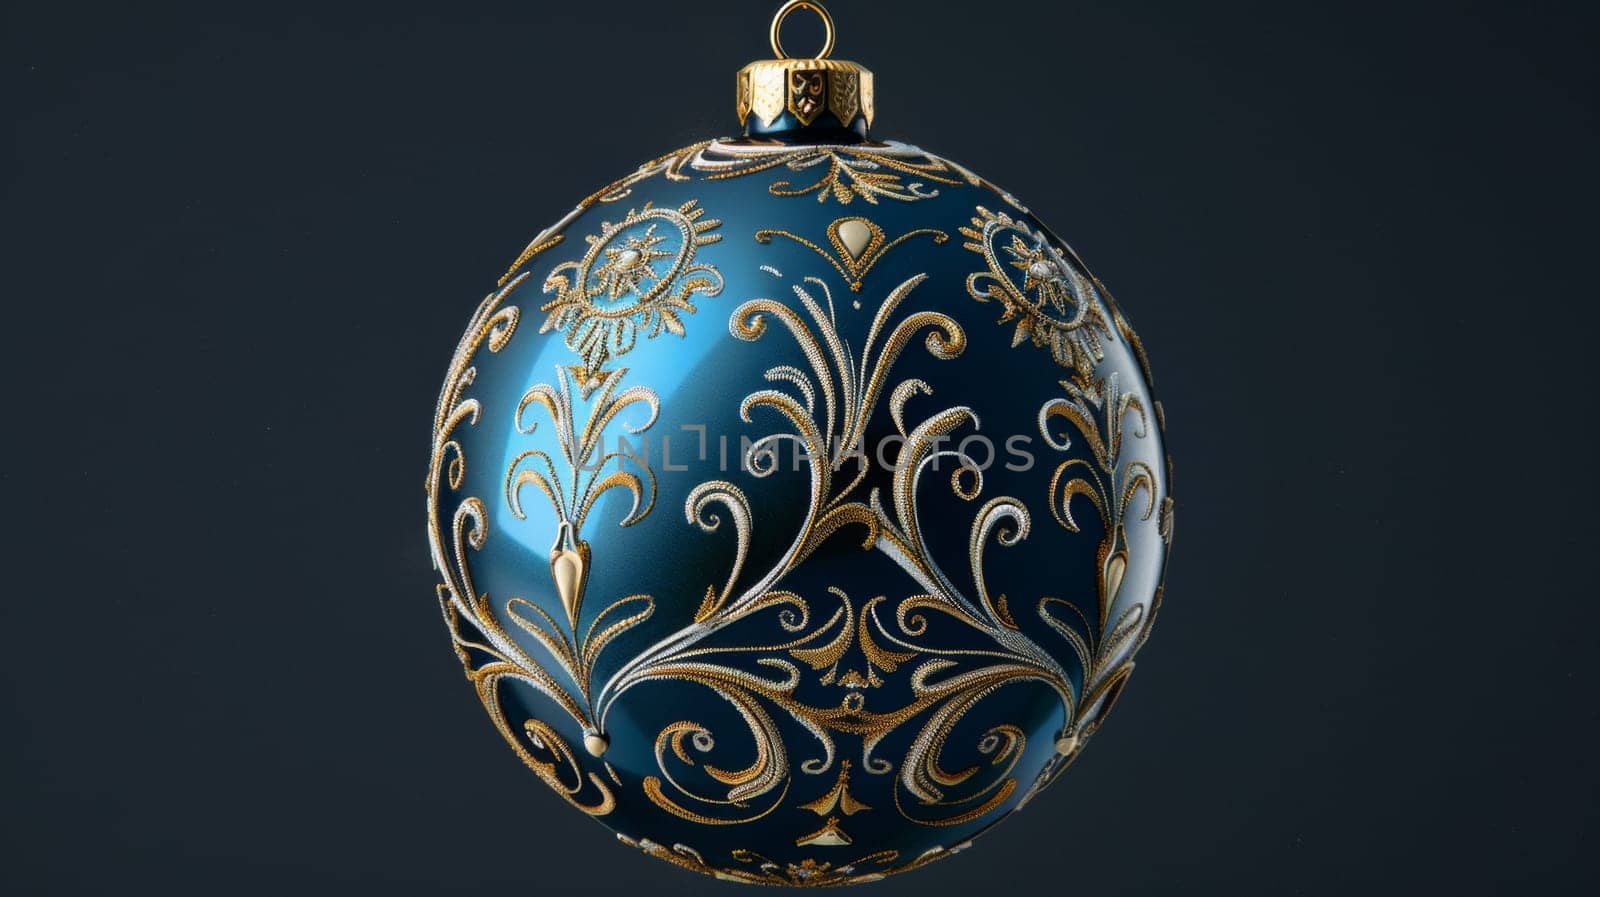 A blue ornament with gold design hanging from a black background, AI by starush